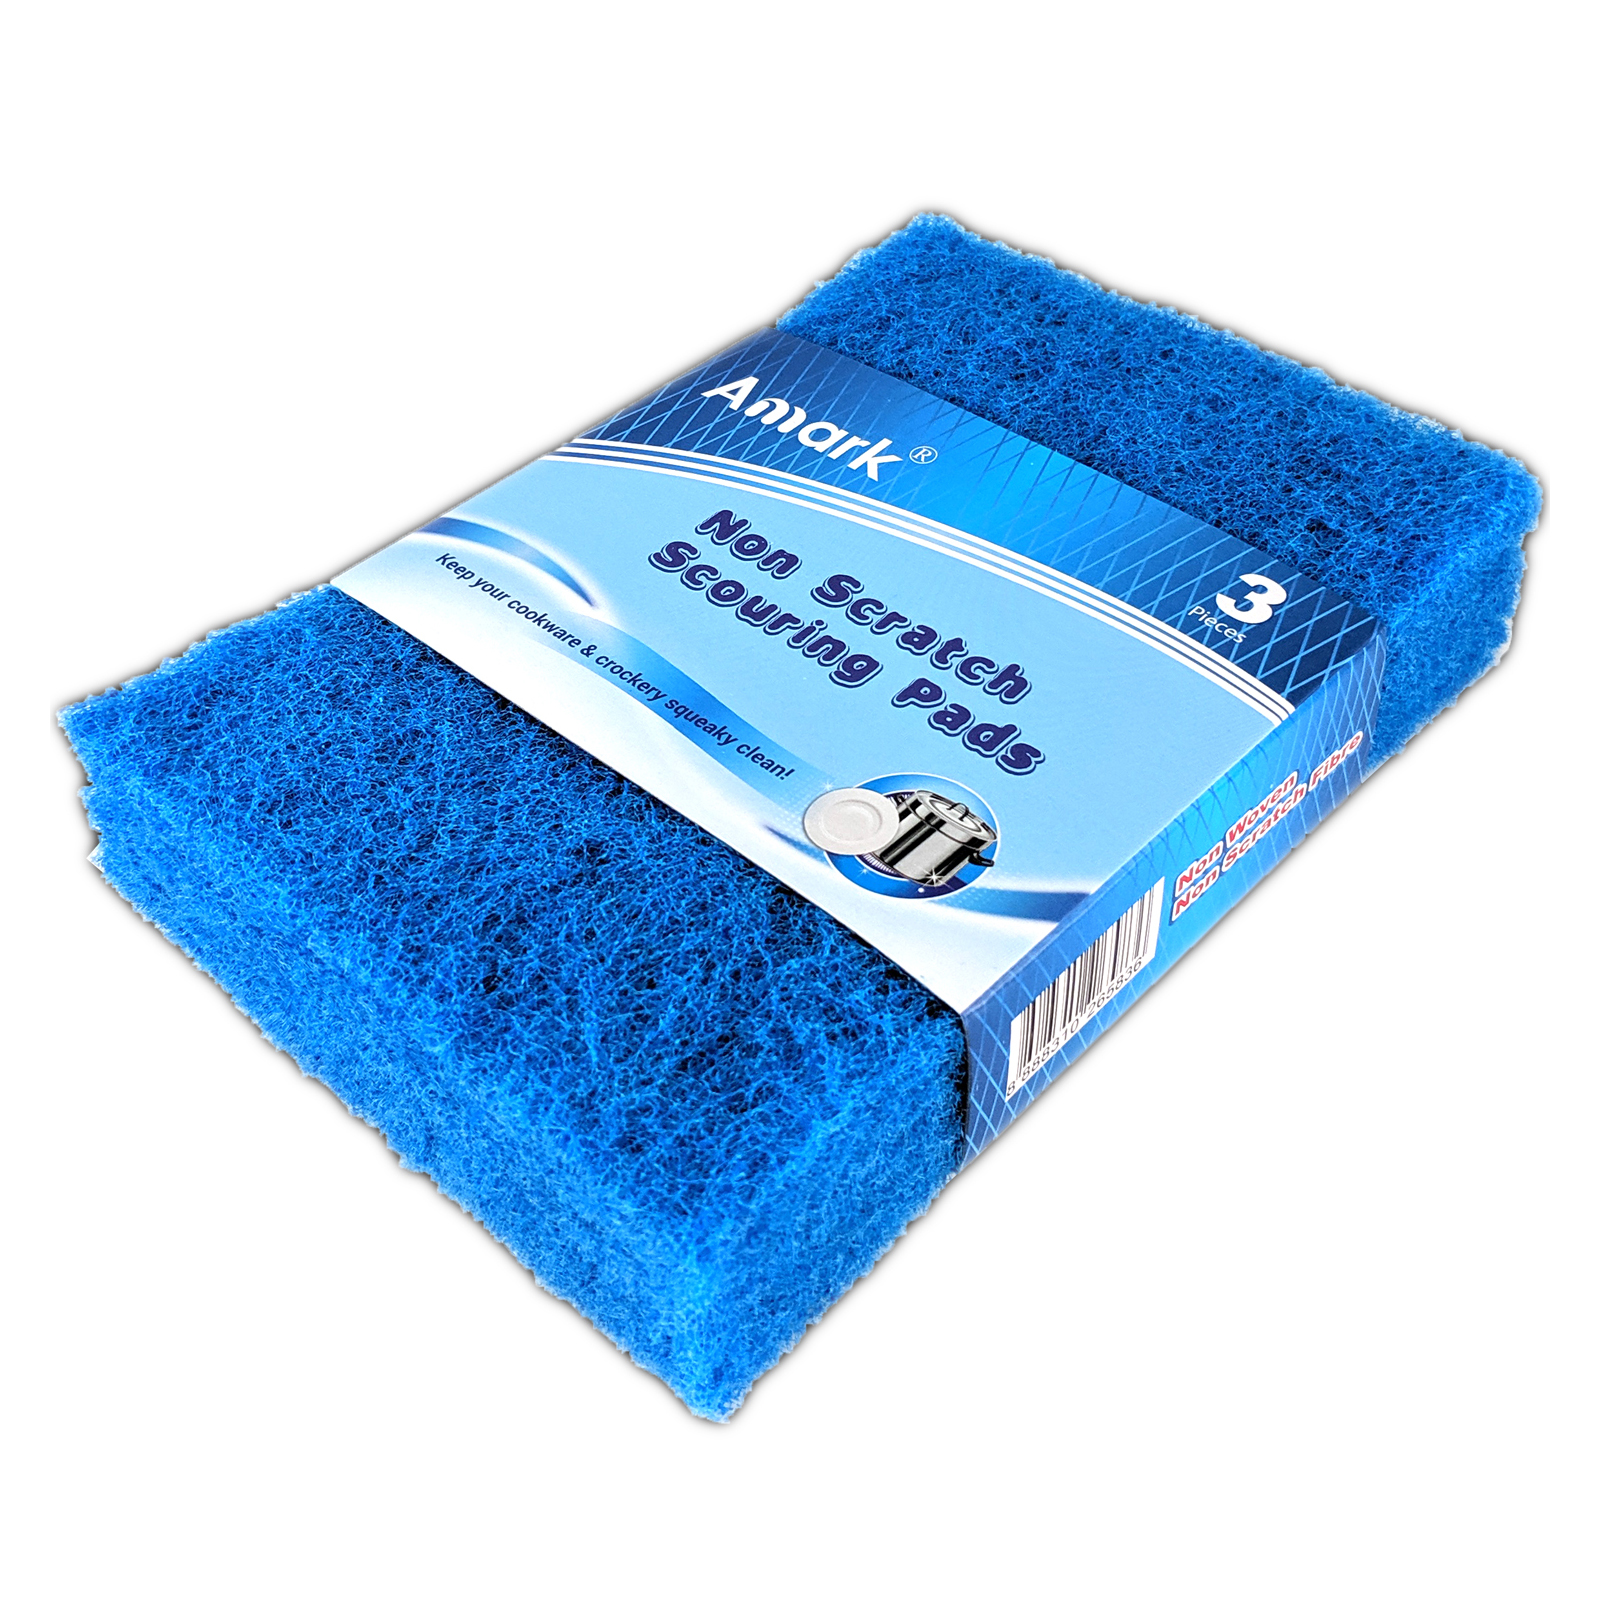 Amark Colour Non-Scratch Scouring Pads 6-pc Pack